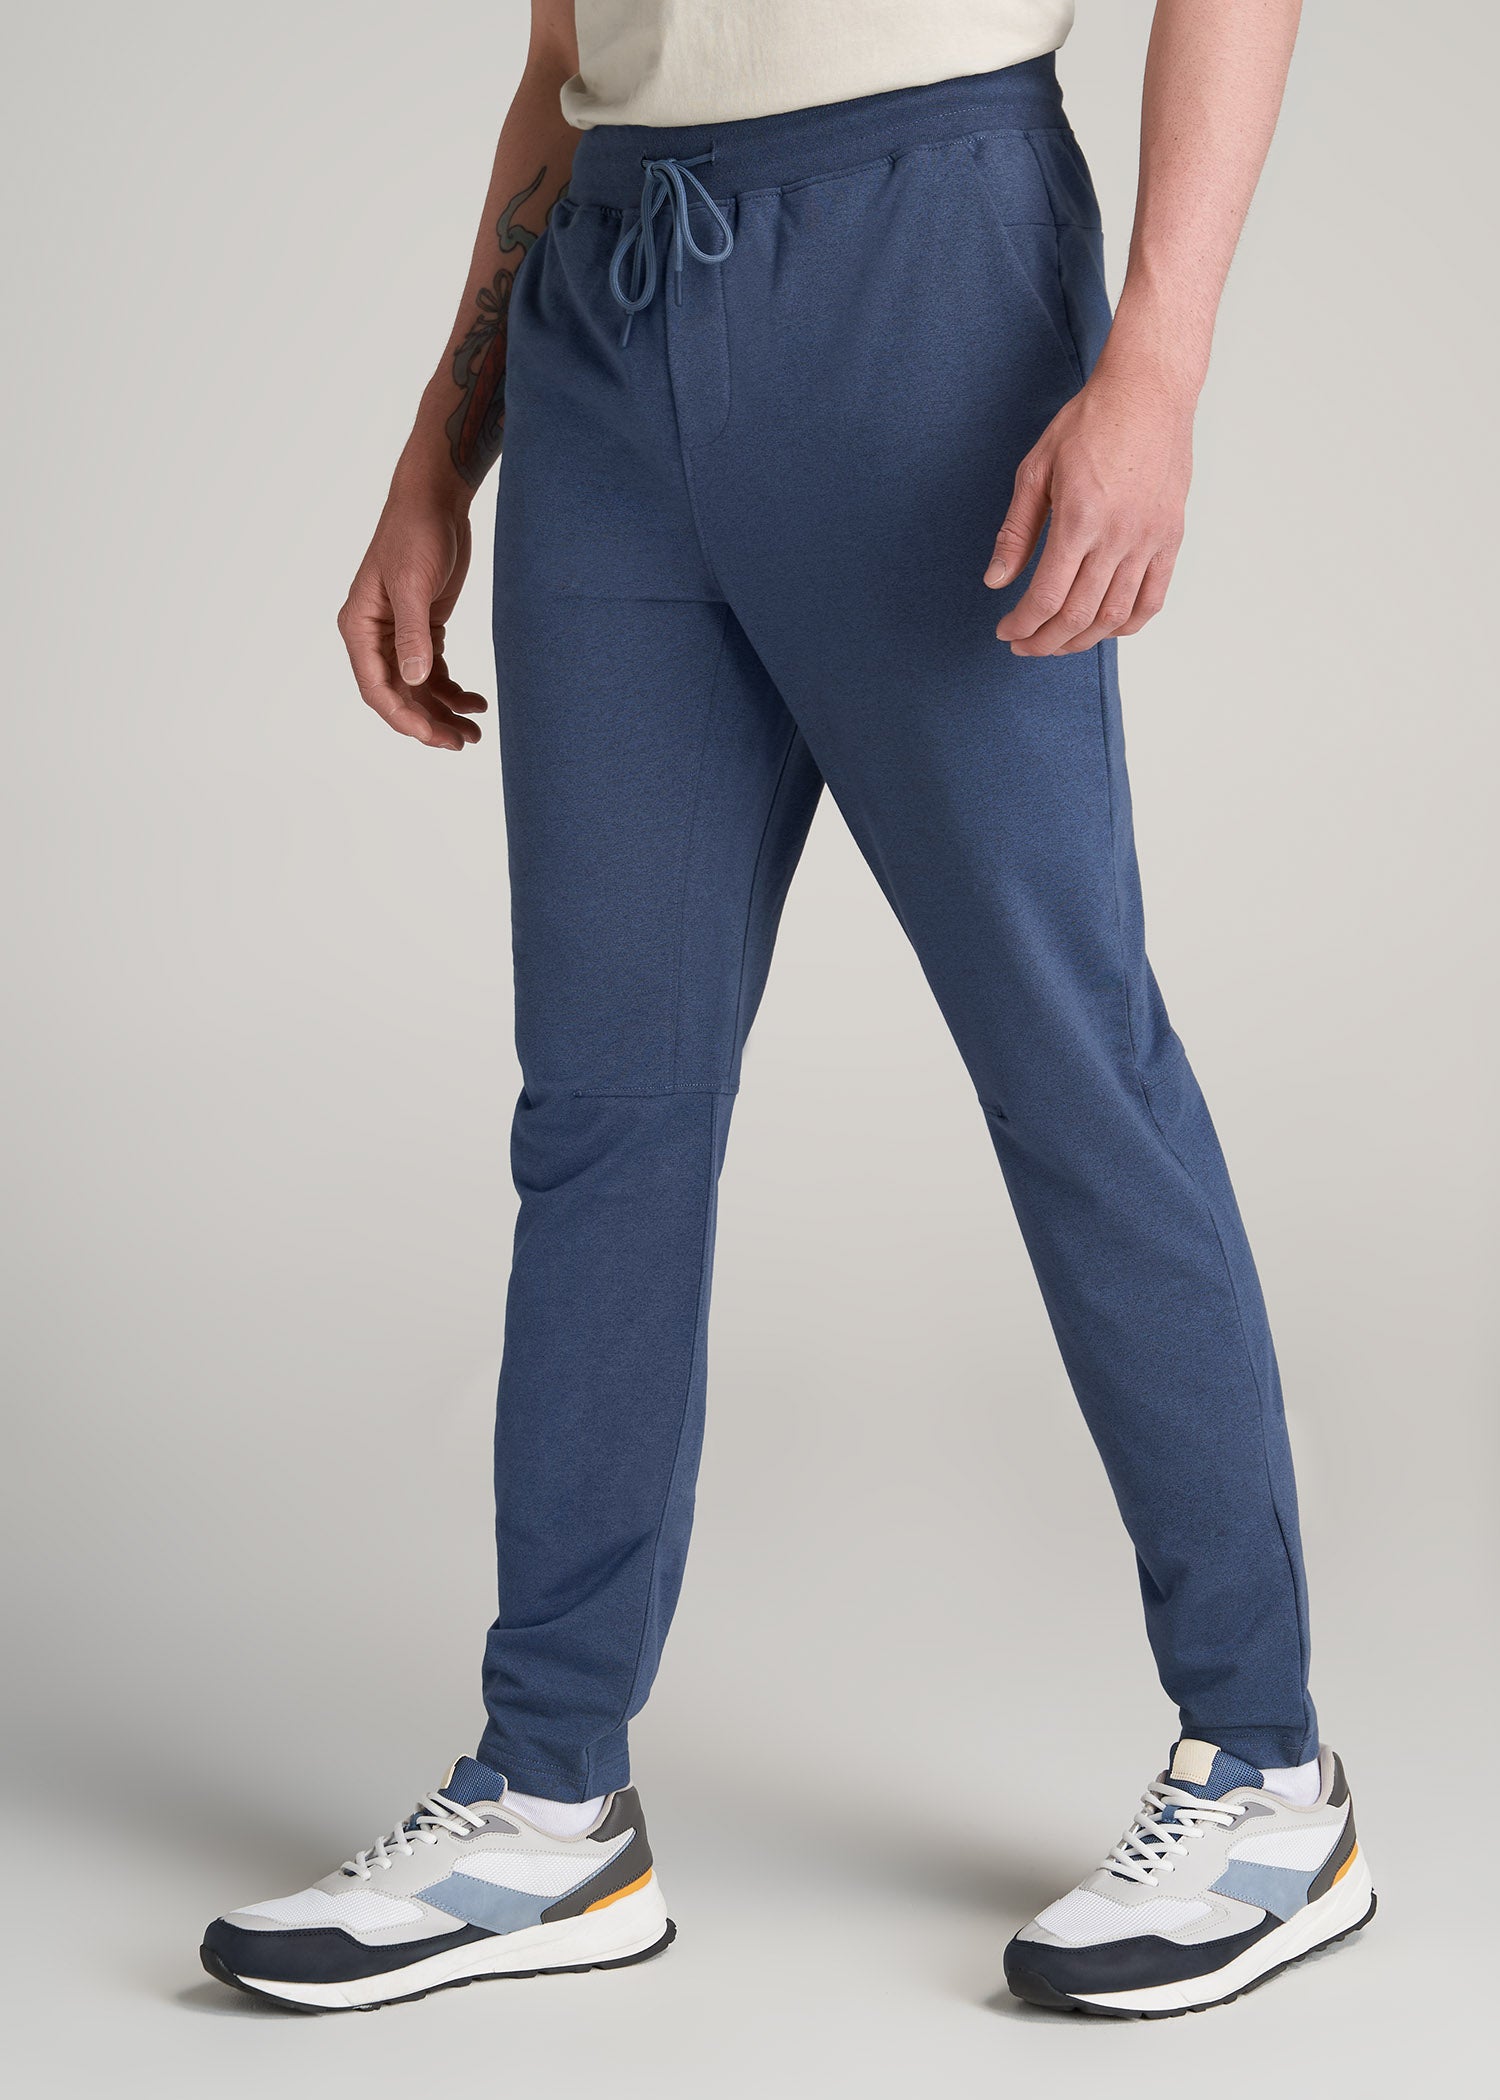         American-Tall-Men-Performance-Tapered-French-Terry-Sweatpants-Navy-Mix-side